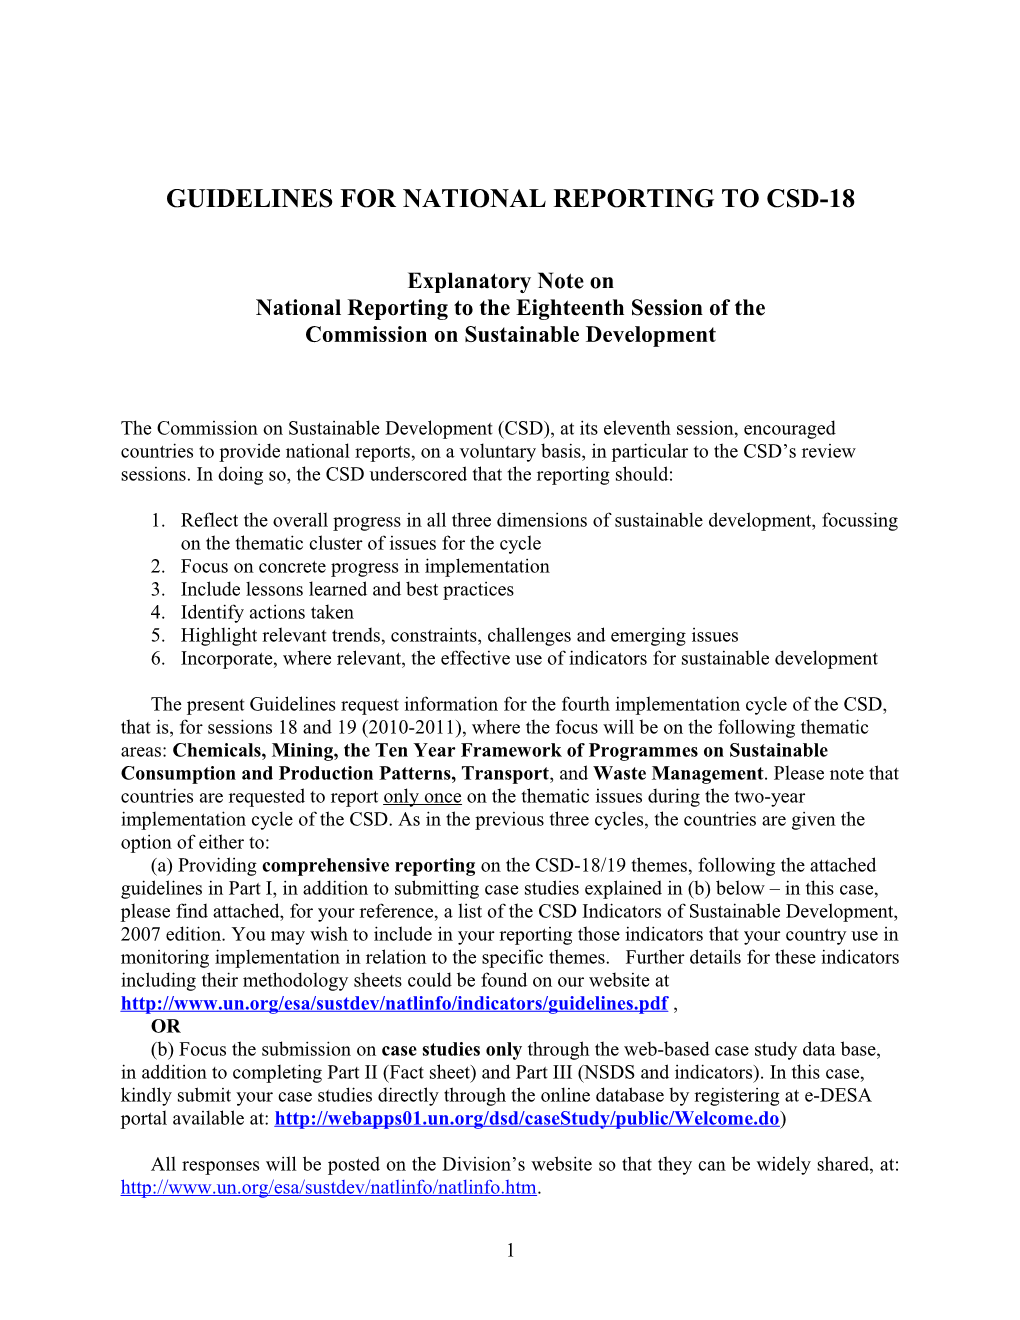 National Reporting Guidelines for Csd-18/19 Thematic Areas